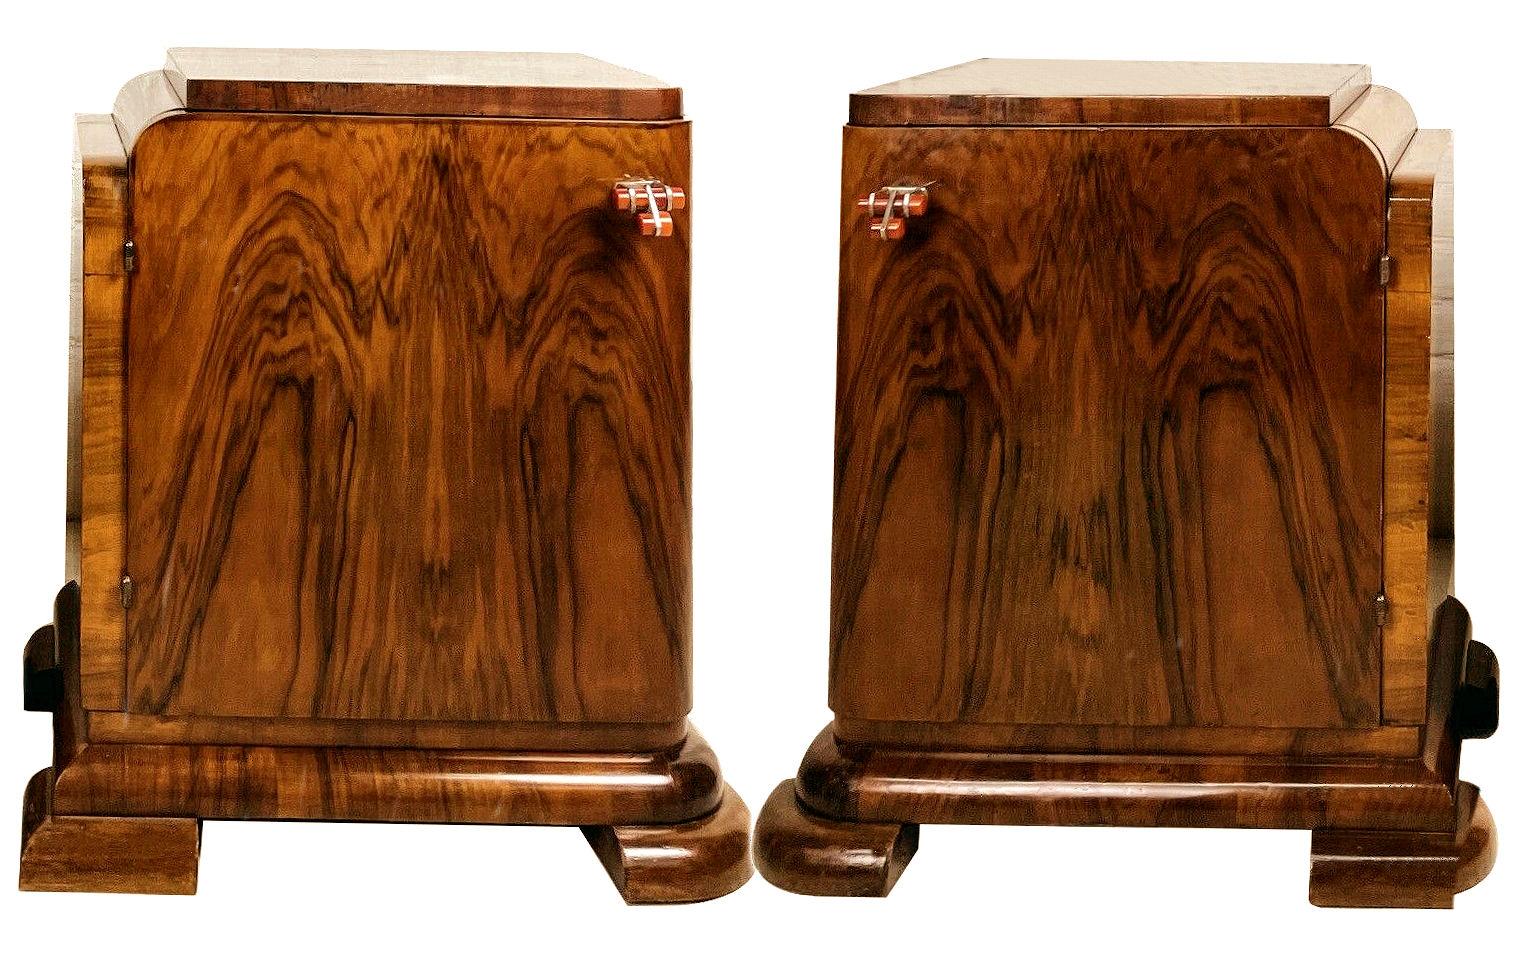 A rare opportunity to acquire such high styled and totally original Art Deco bedside tables. Originating from mainland Europe and dating to the early 1930's they fill both the highly desired shape of Art Deco at its best and sort after the luscious